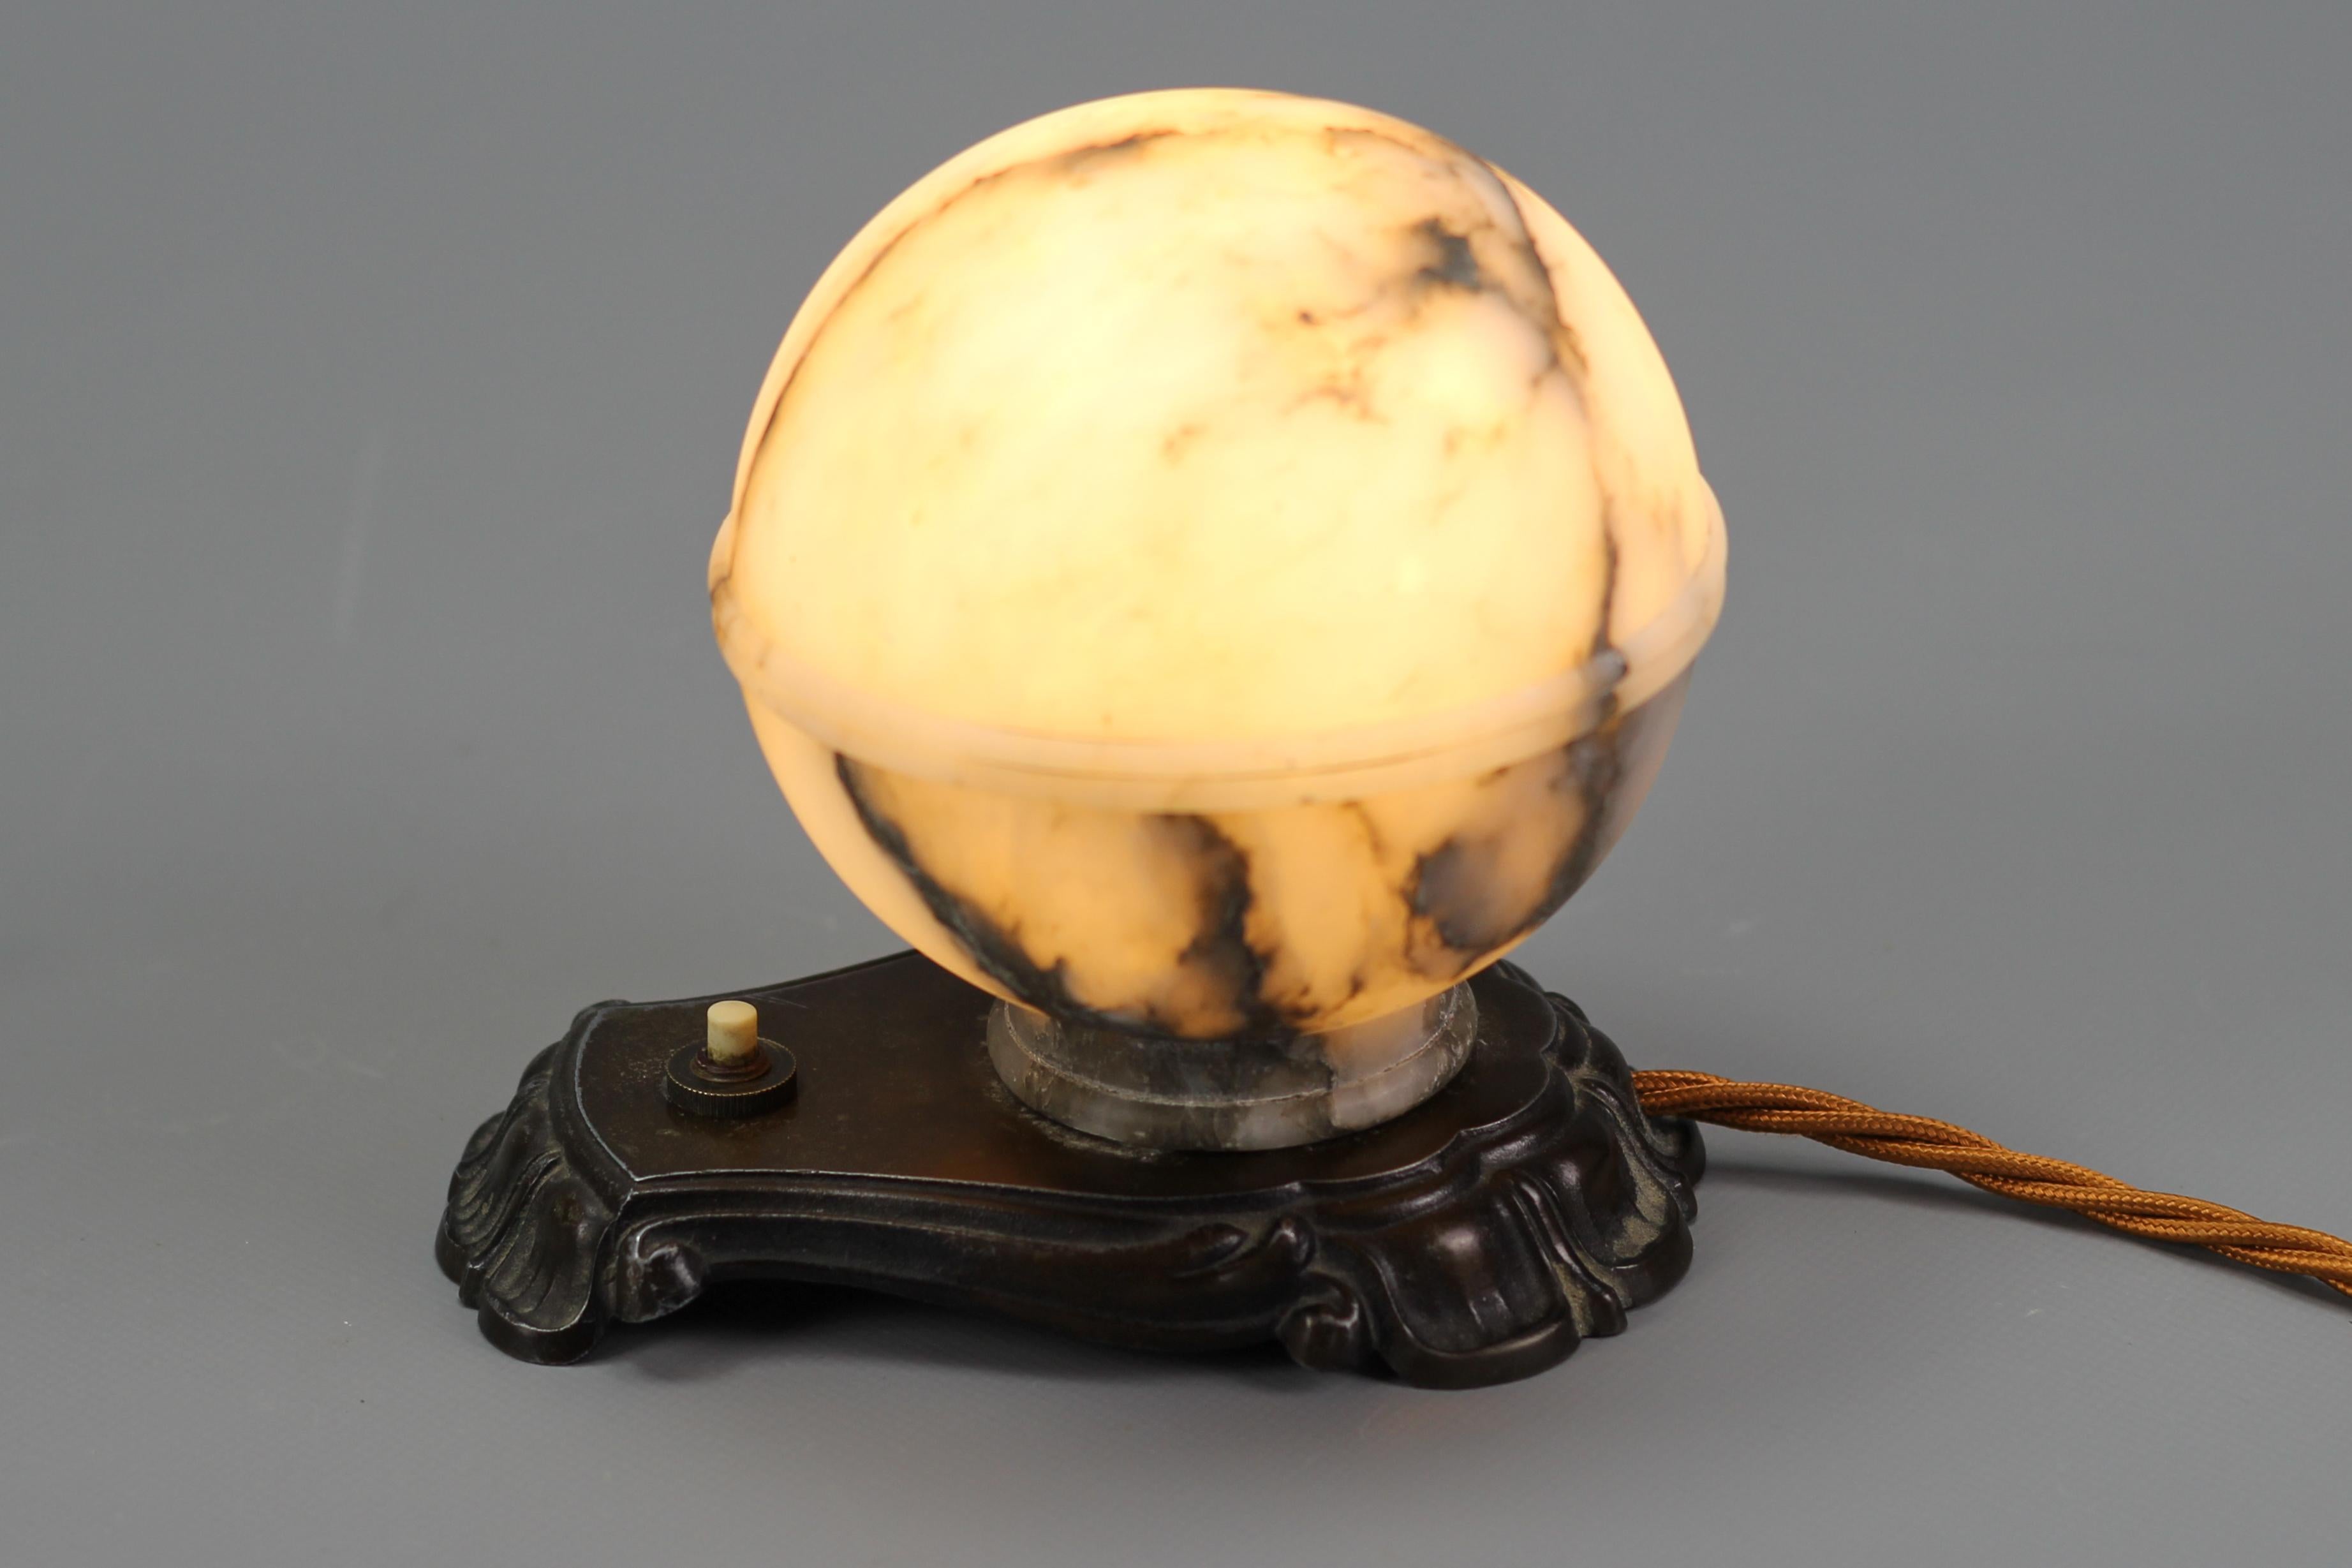 Art Deco White and Black Alabaster Globe Sphere Night Lamp or Mood Lamp, 1930s For Sale 3